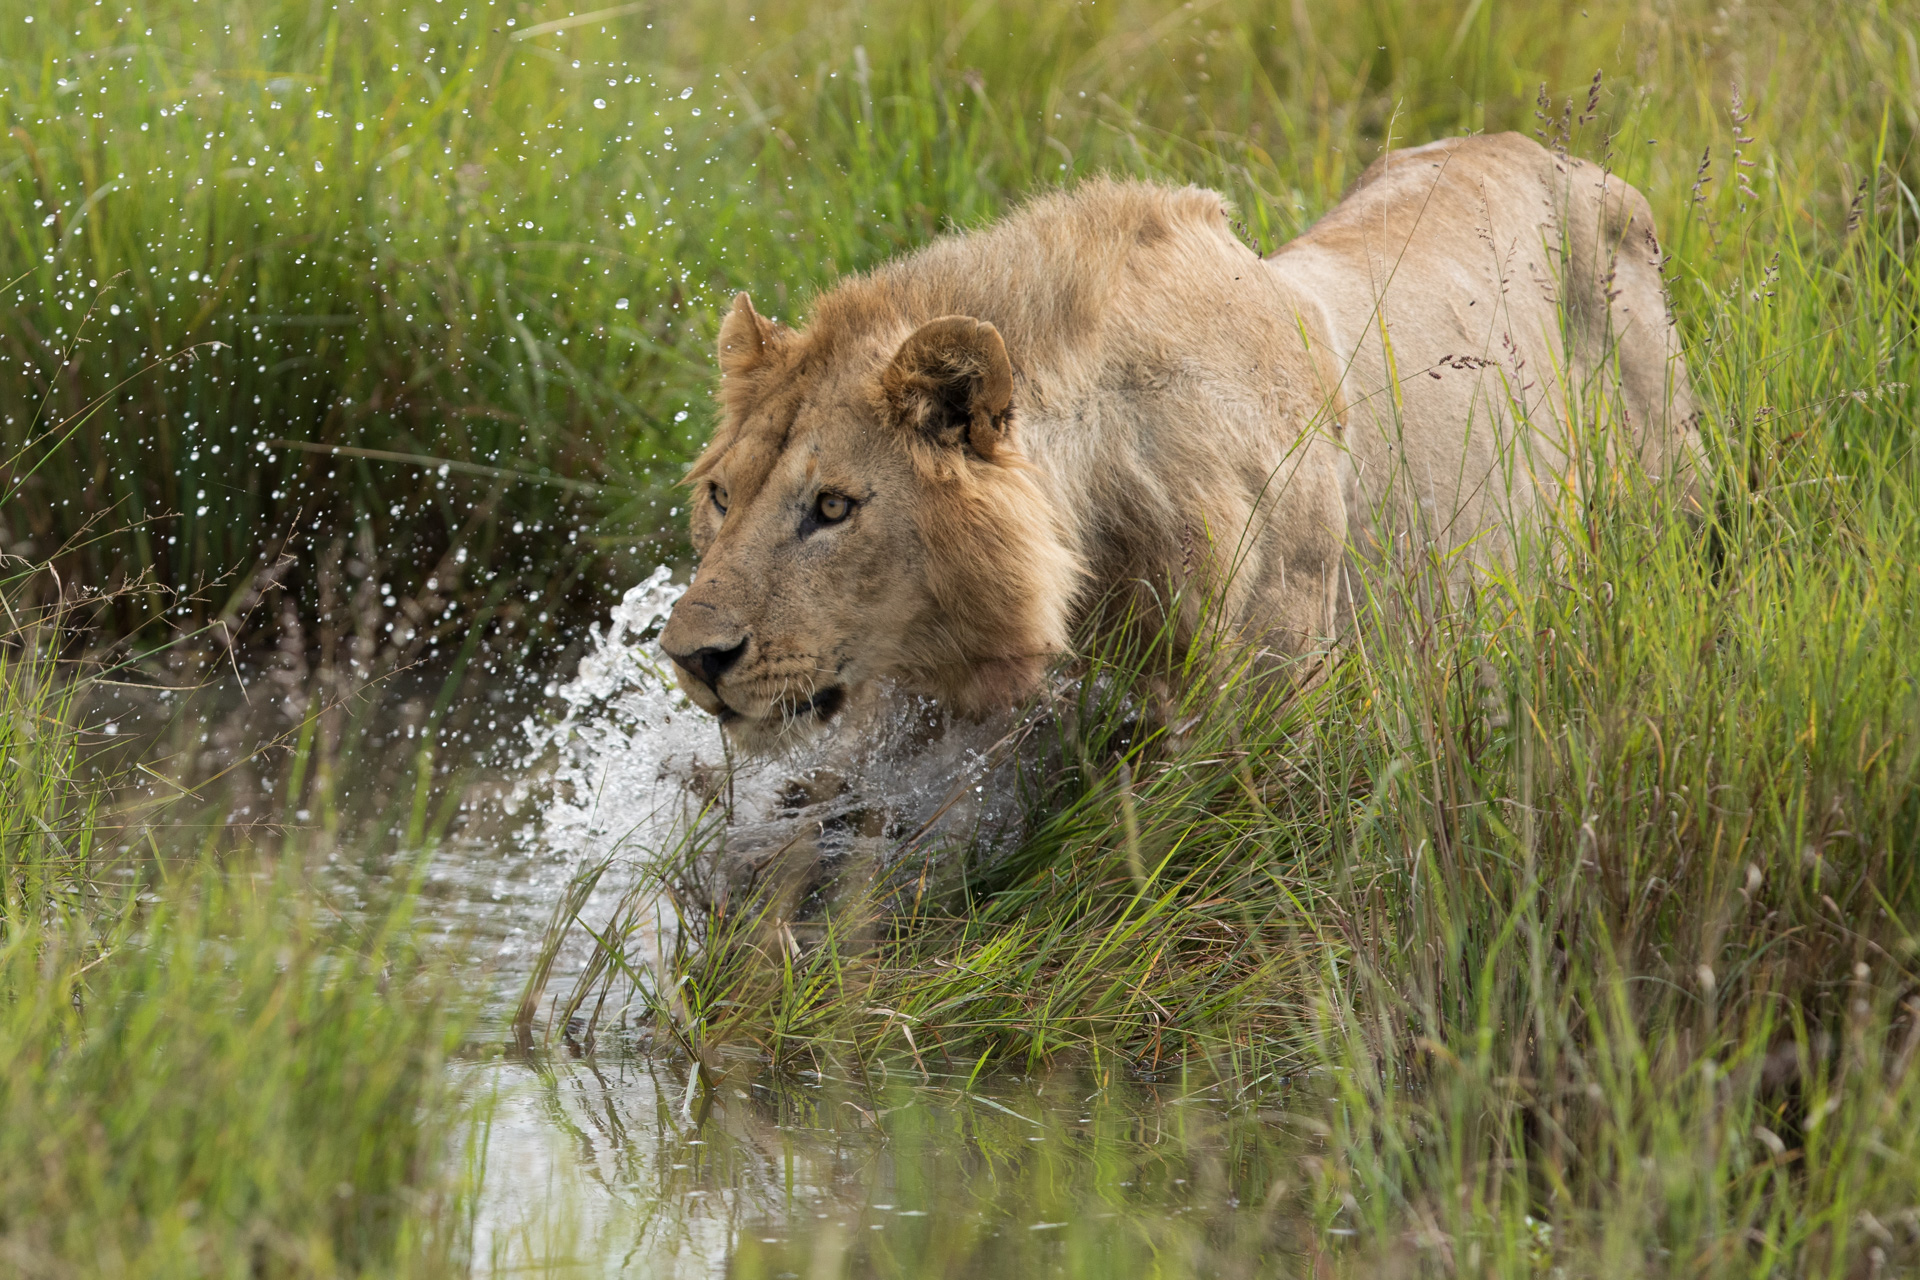  lion in water